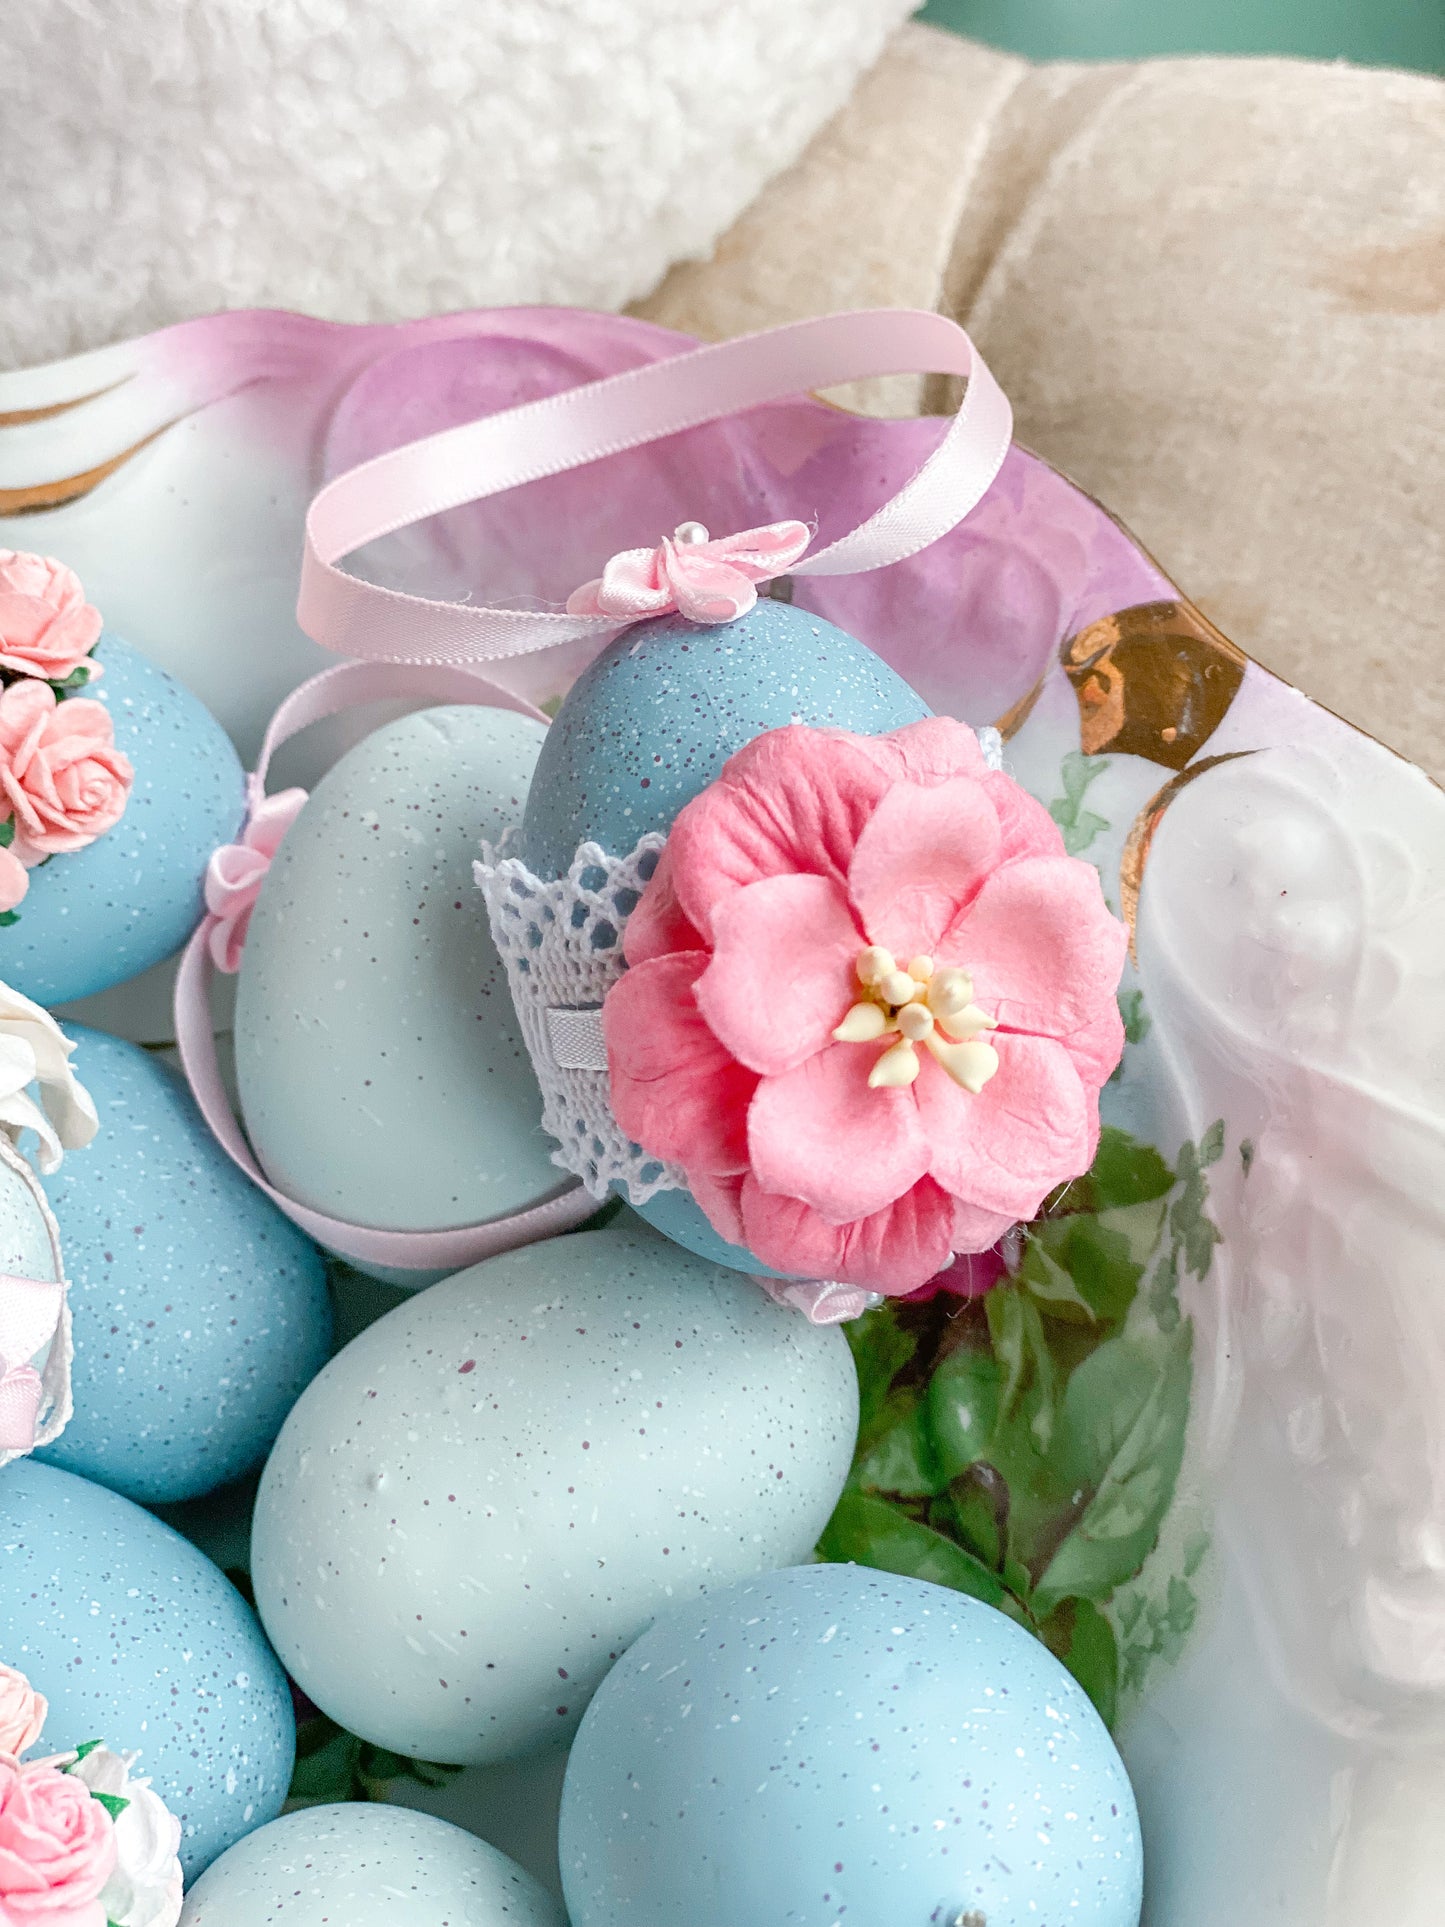 Set of 4 Bespoke Blue and Pink Egg Ornaments